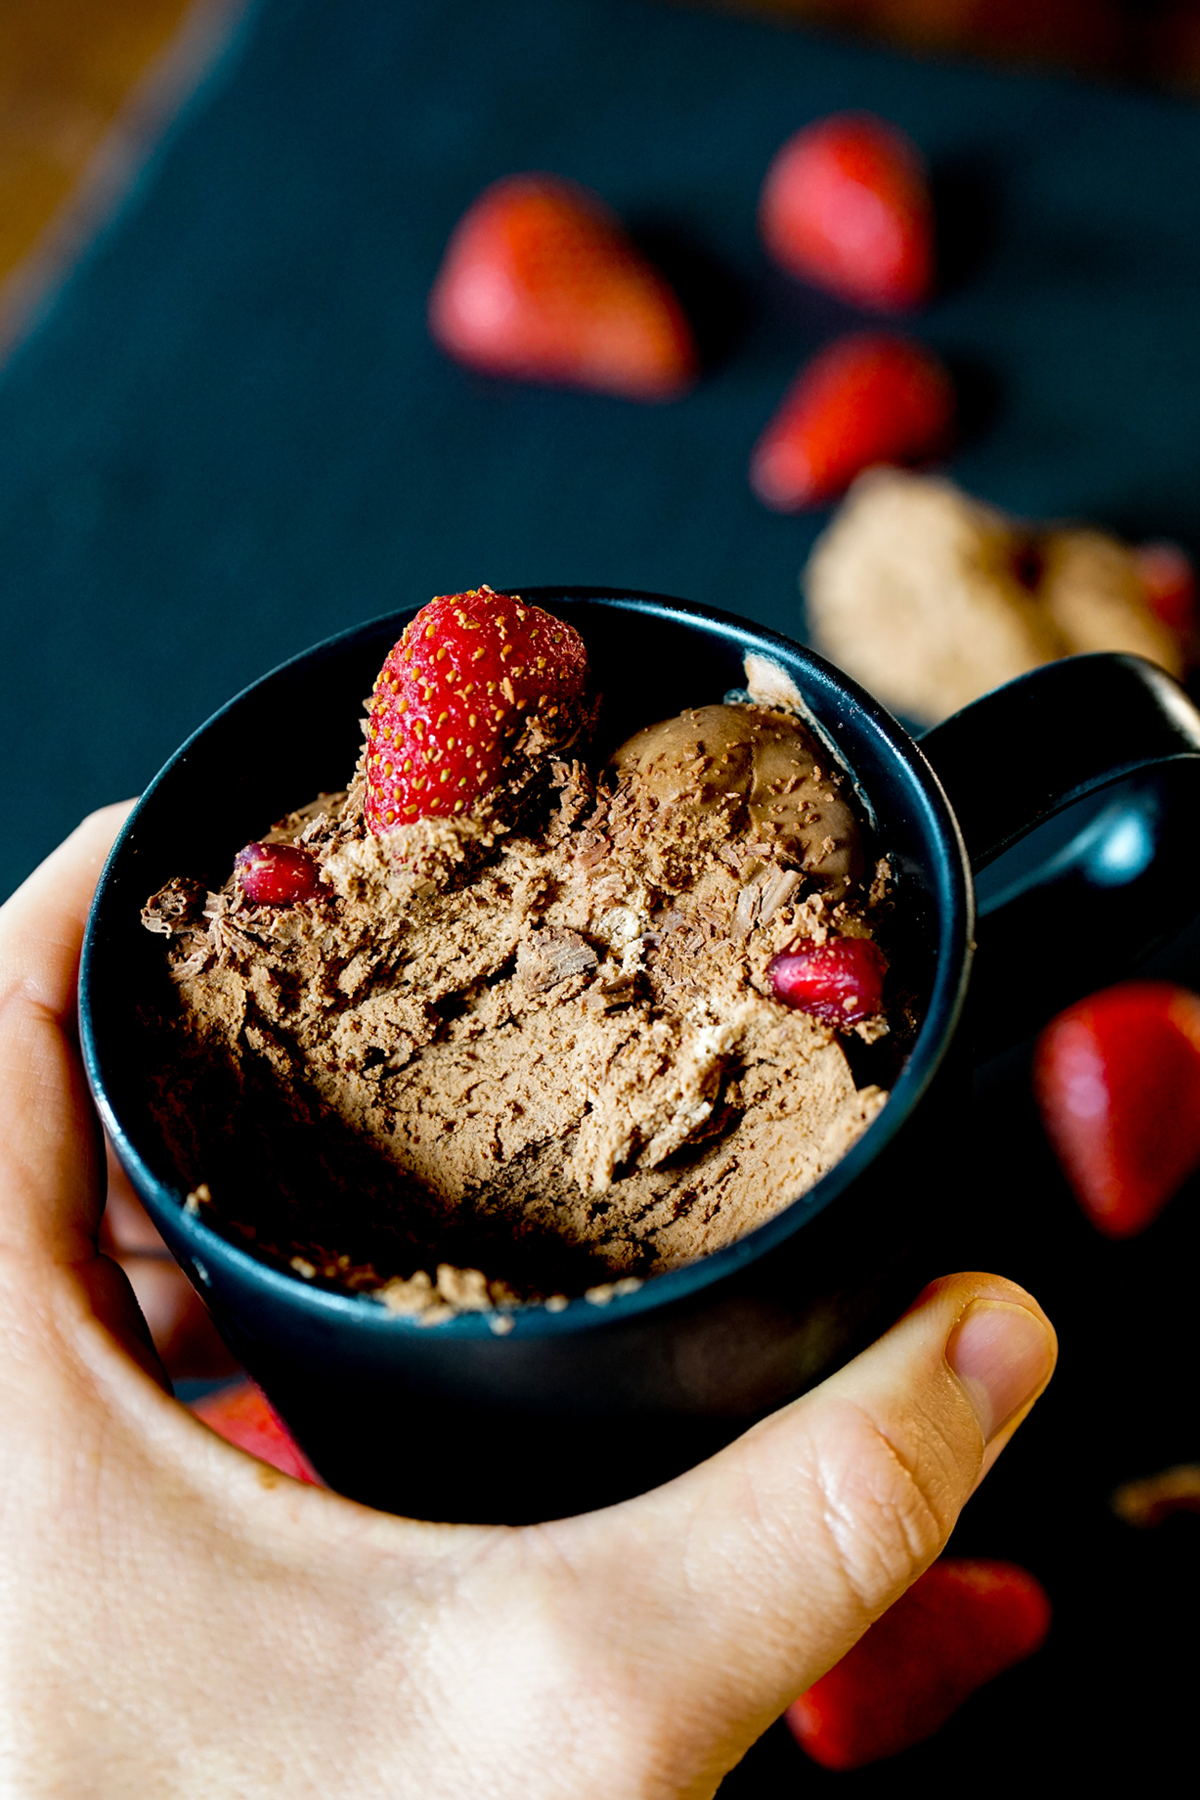 Chocolate Mousse with Fluffy texture